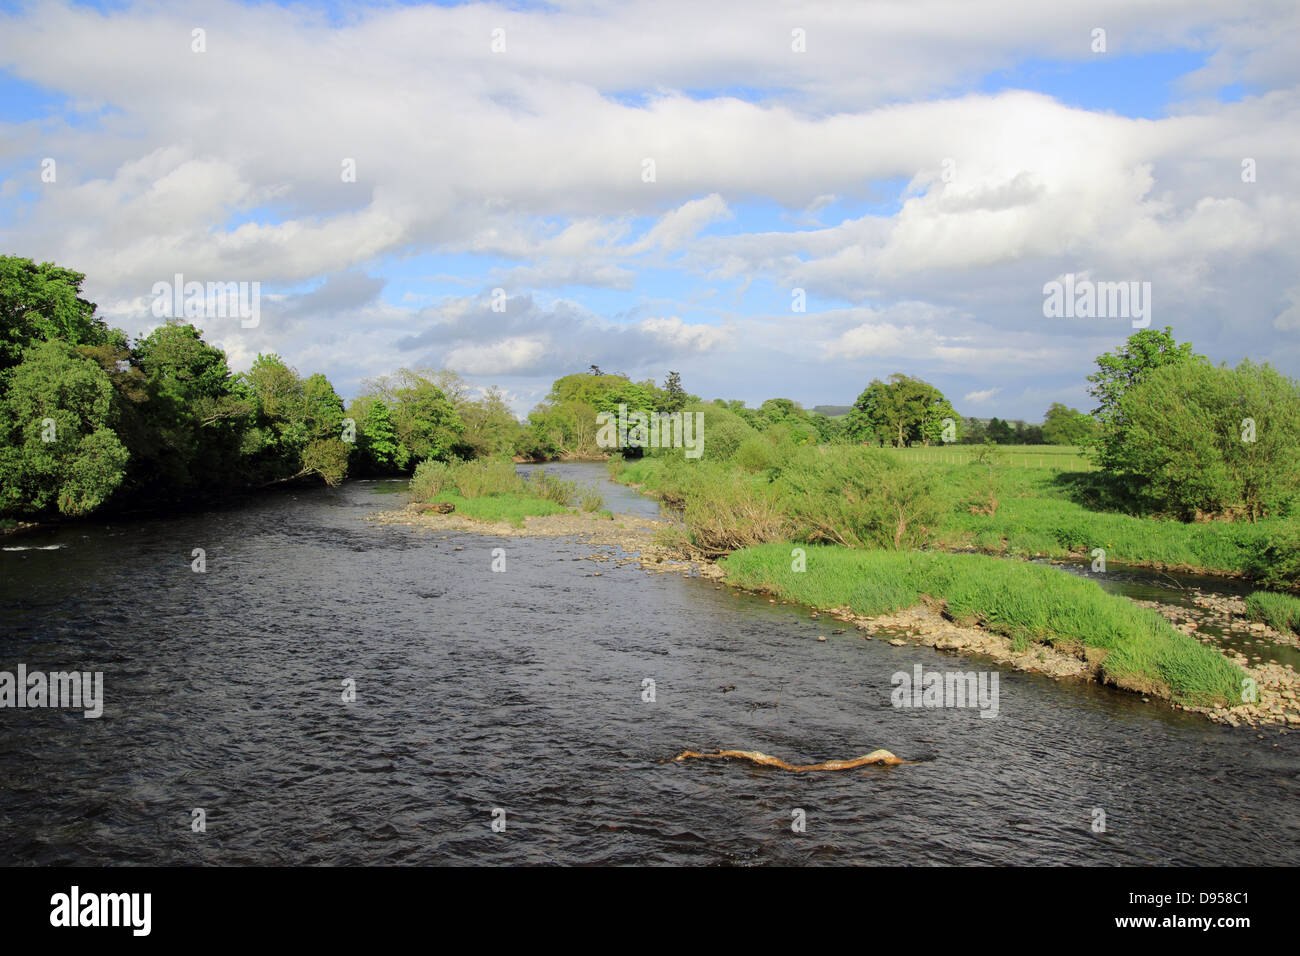 River Annan, Annandale, Dumfries and Galloway, Scotland, UK Stock Photo